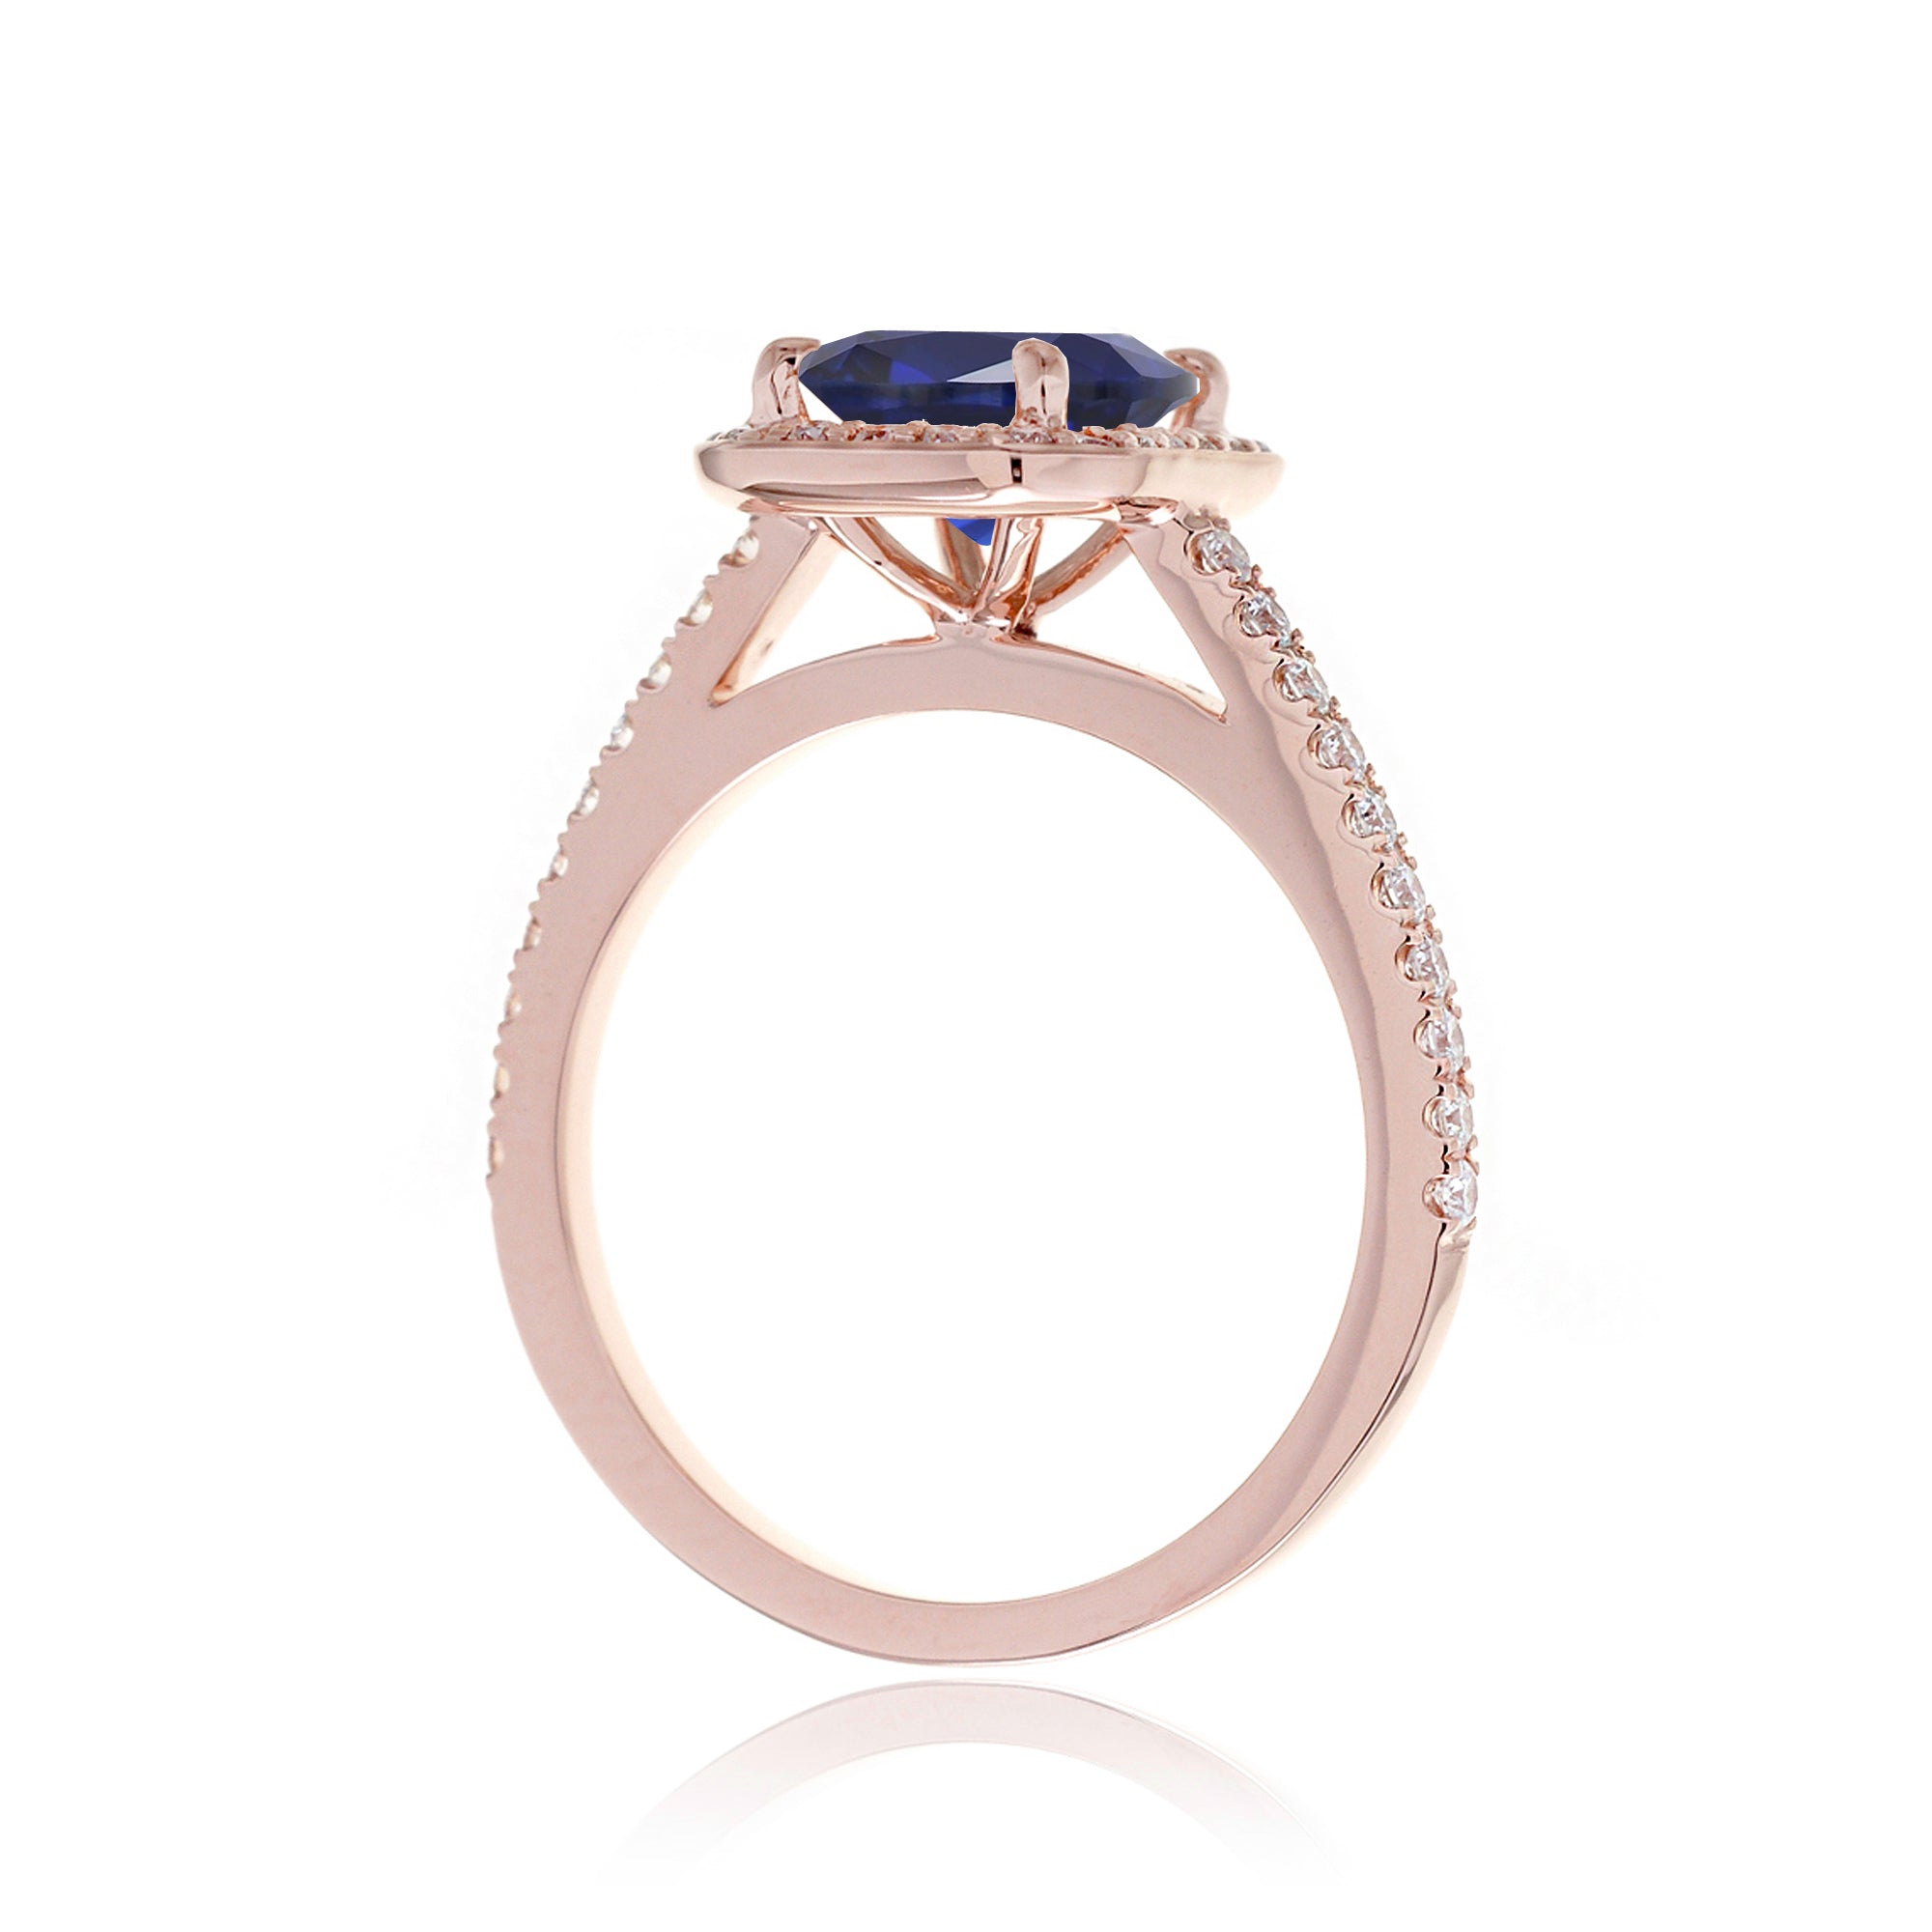 Cushion lab-grown sapphire diamond halo cathedral engagement ring - the Steffy rose gold